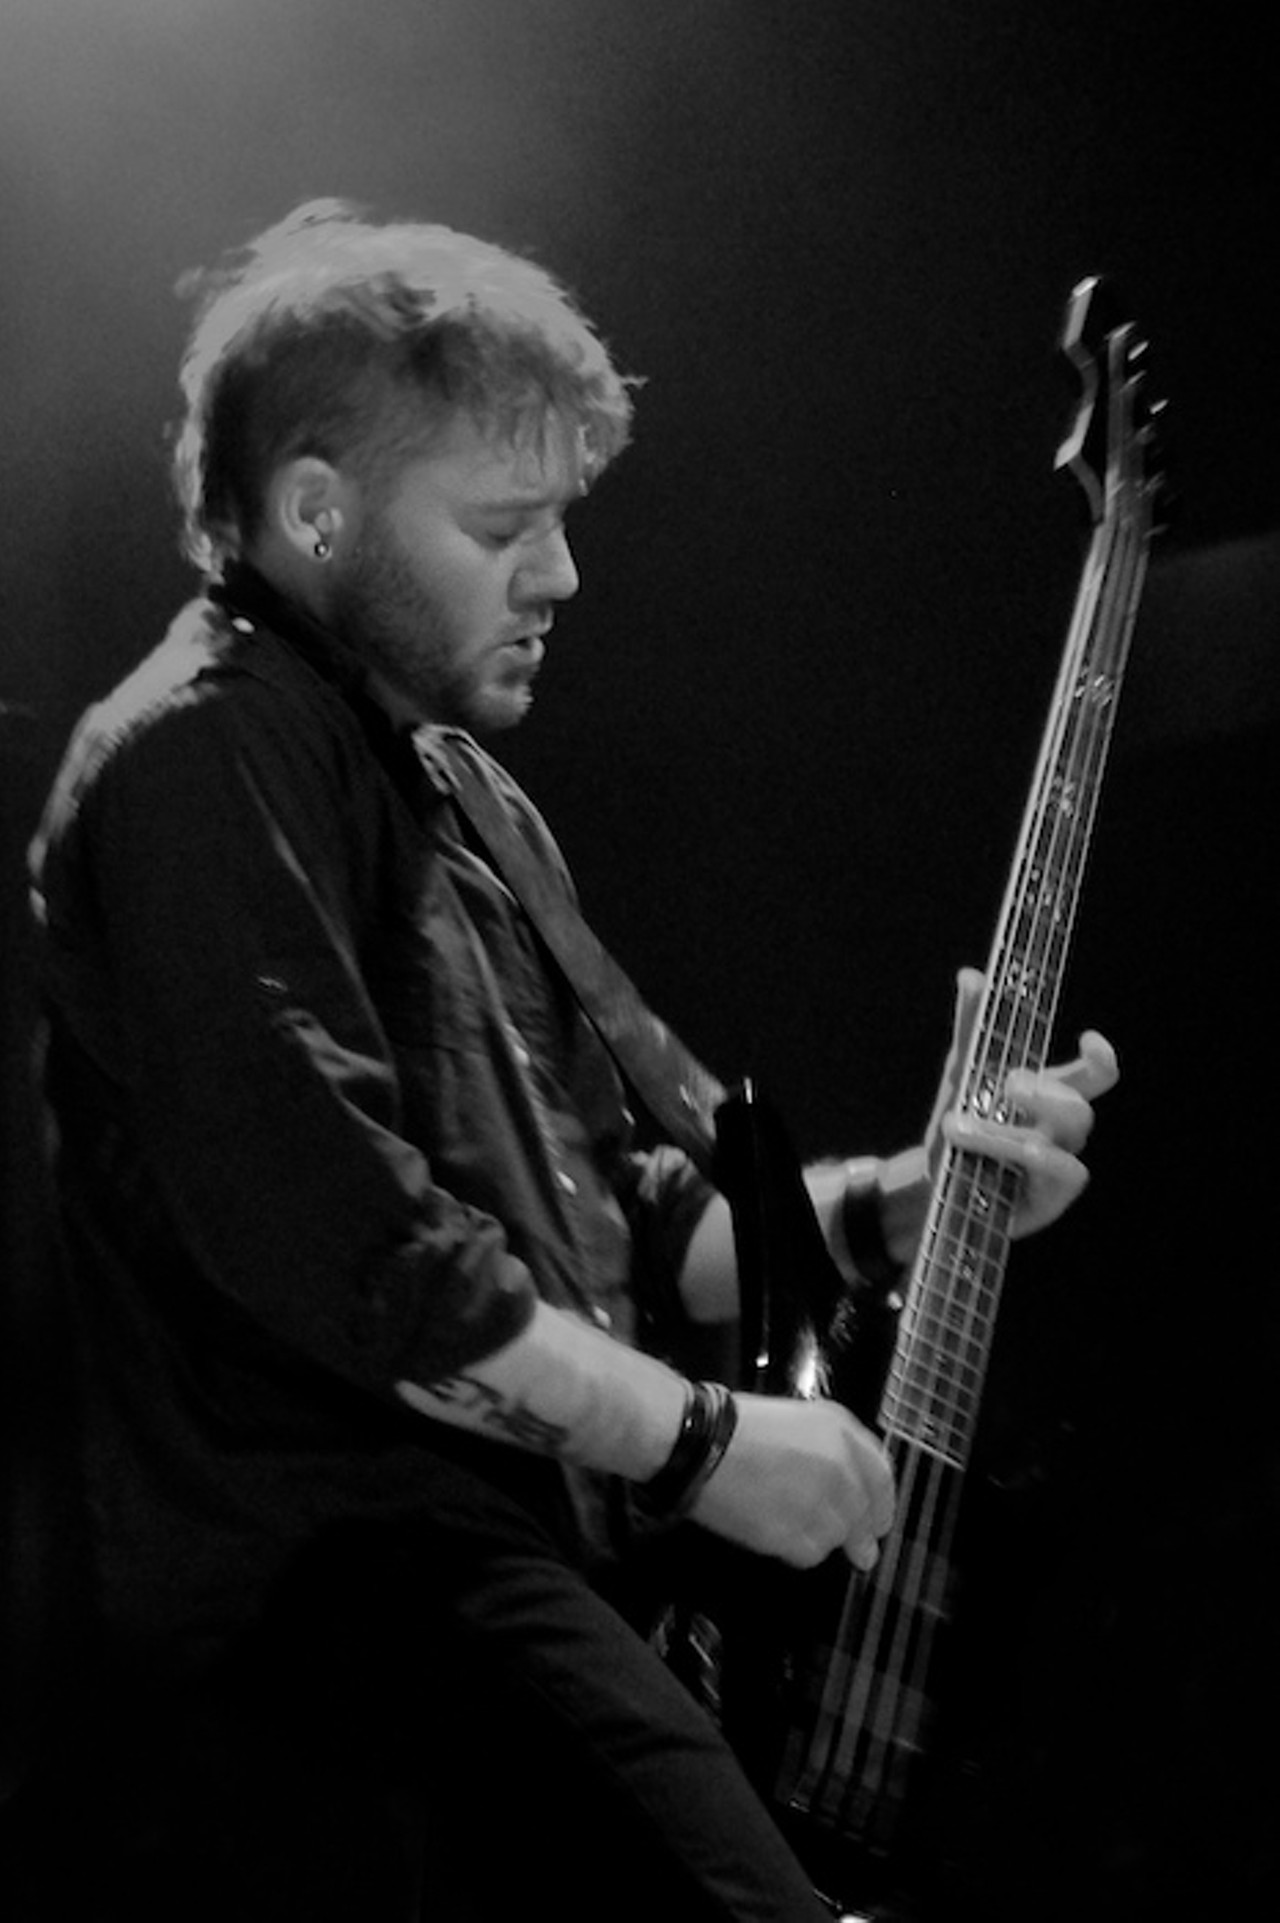 Seether at House of Blues